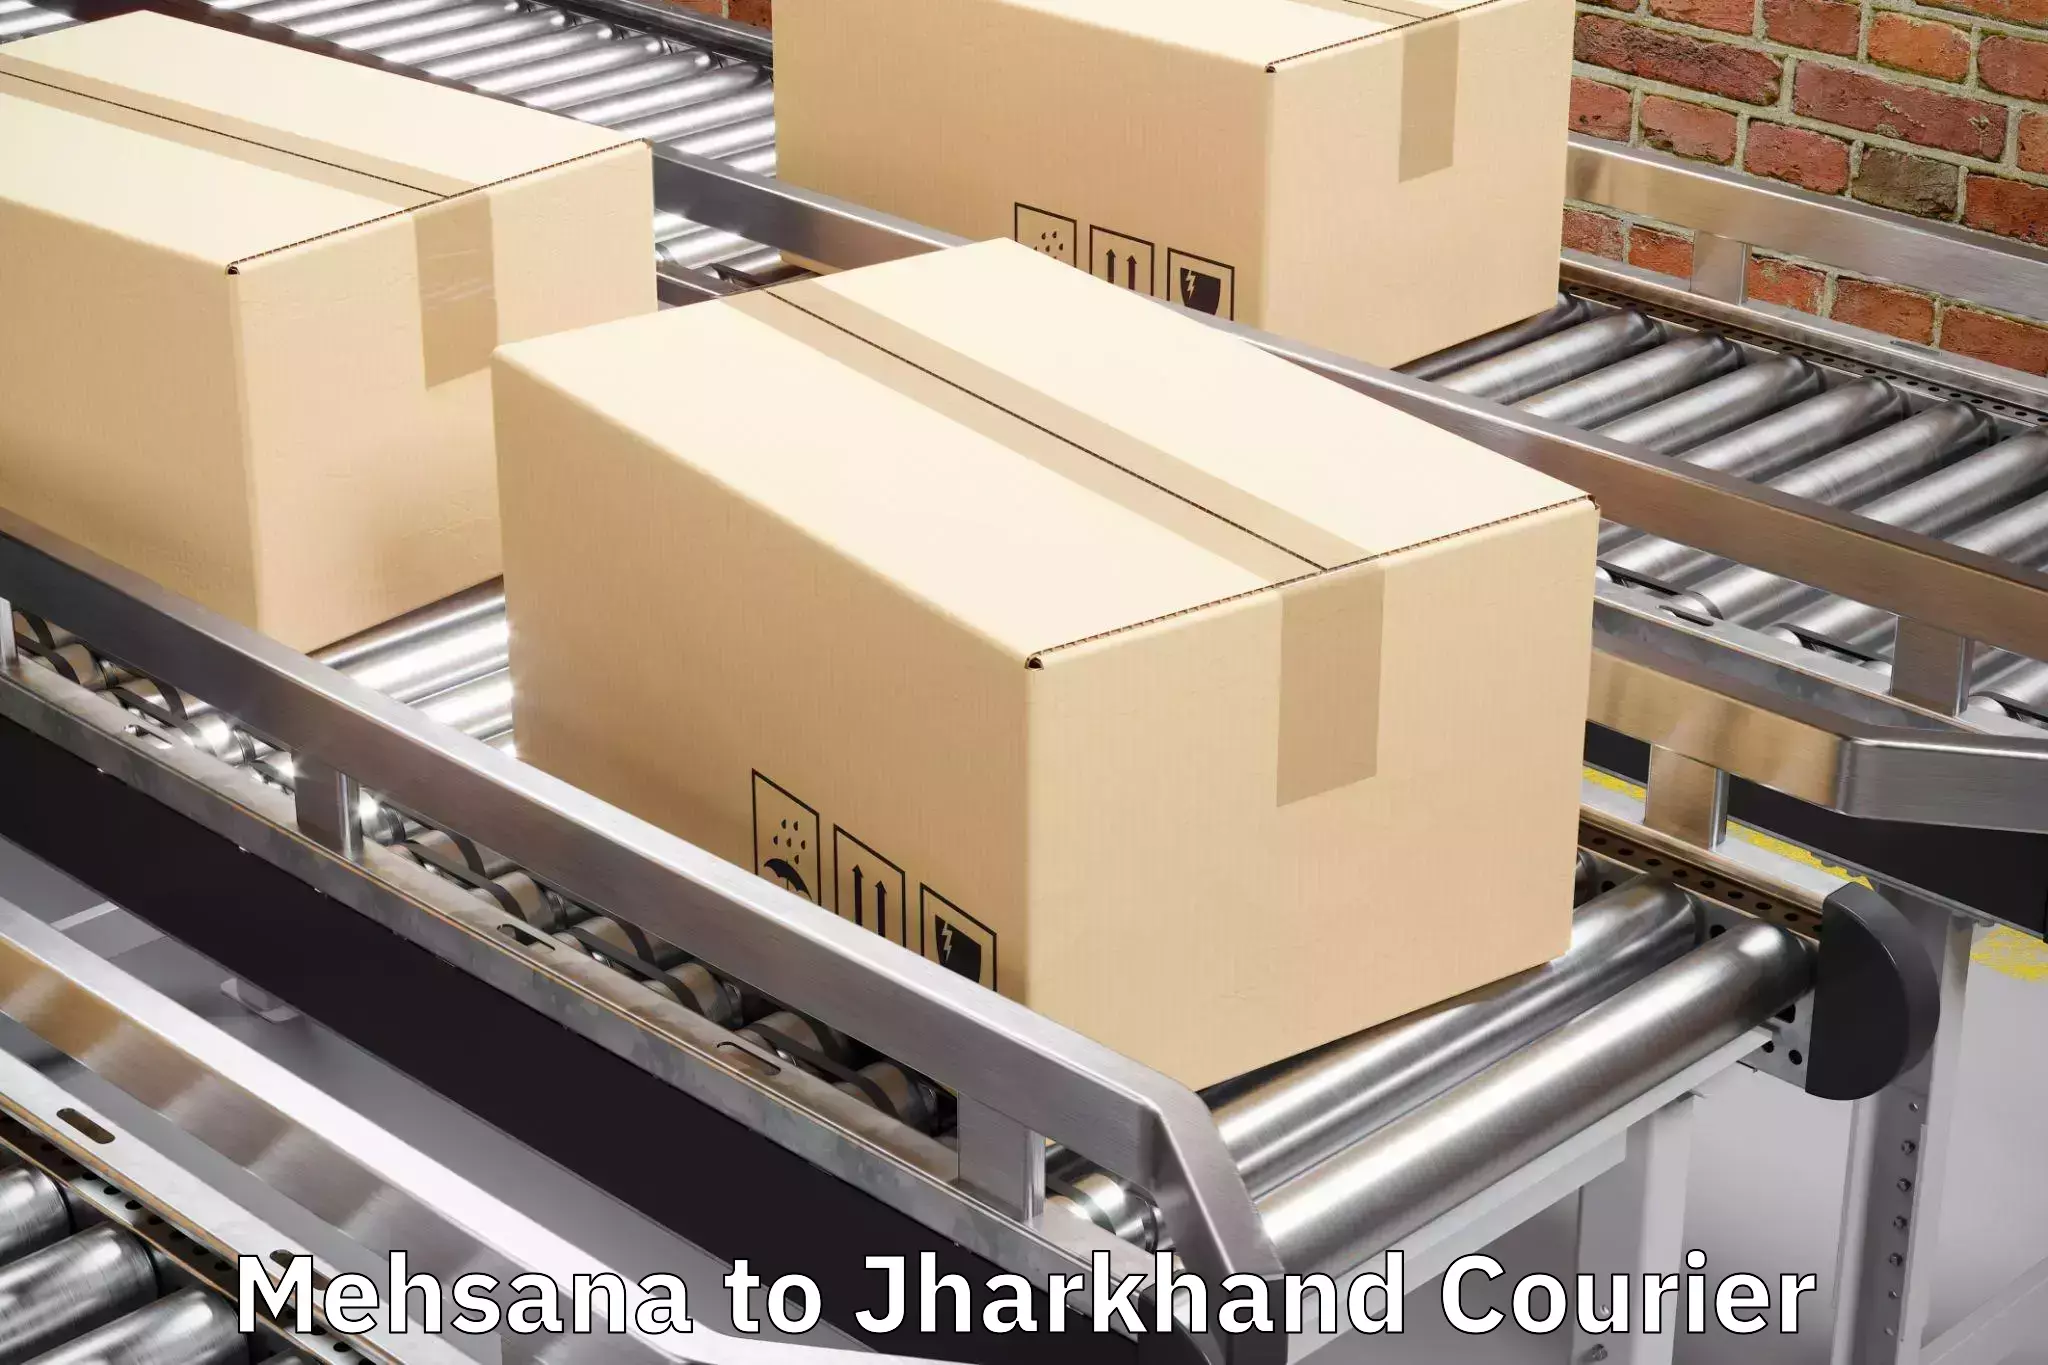 Instant baggage transport quote Mehsana to Dhanbad